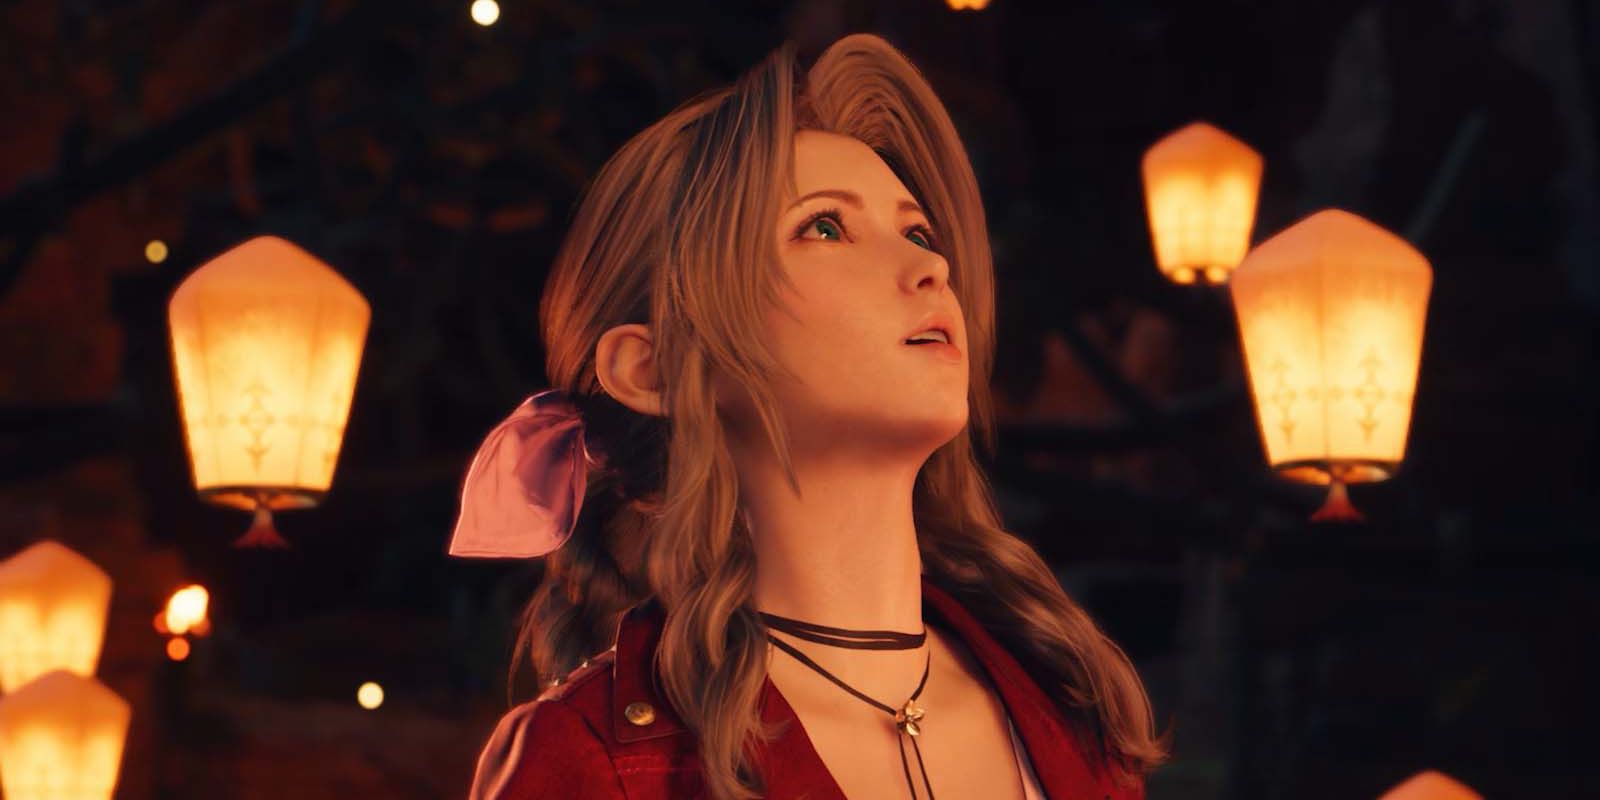 Aerith Gainsborough is in awe of floating lanterns during a Cosmo Canyon ceremony in Final Fantasy VII Rebirth